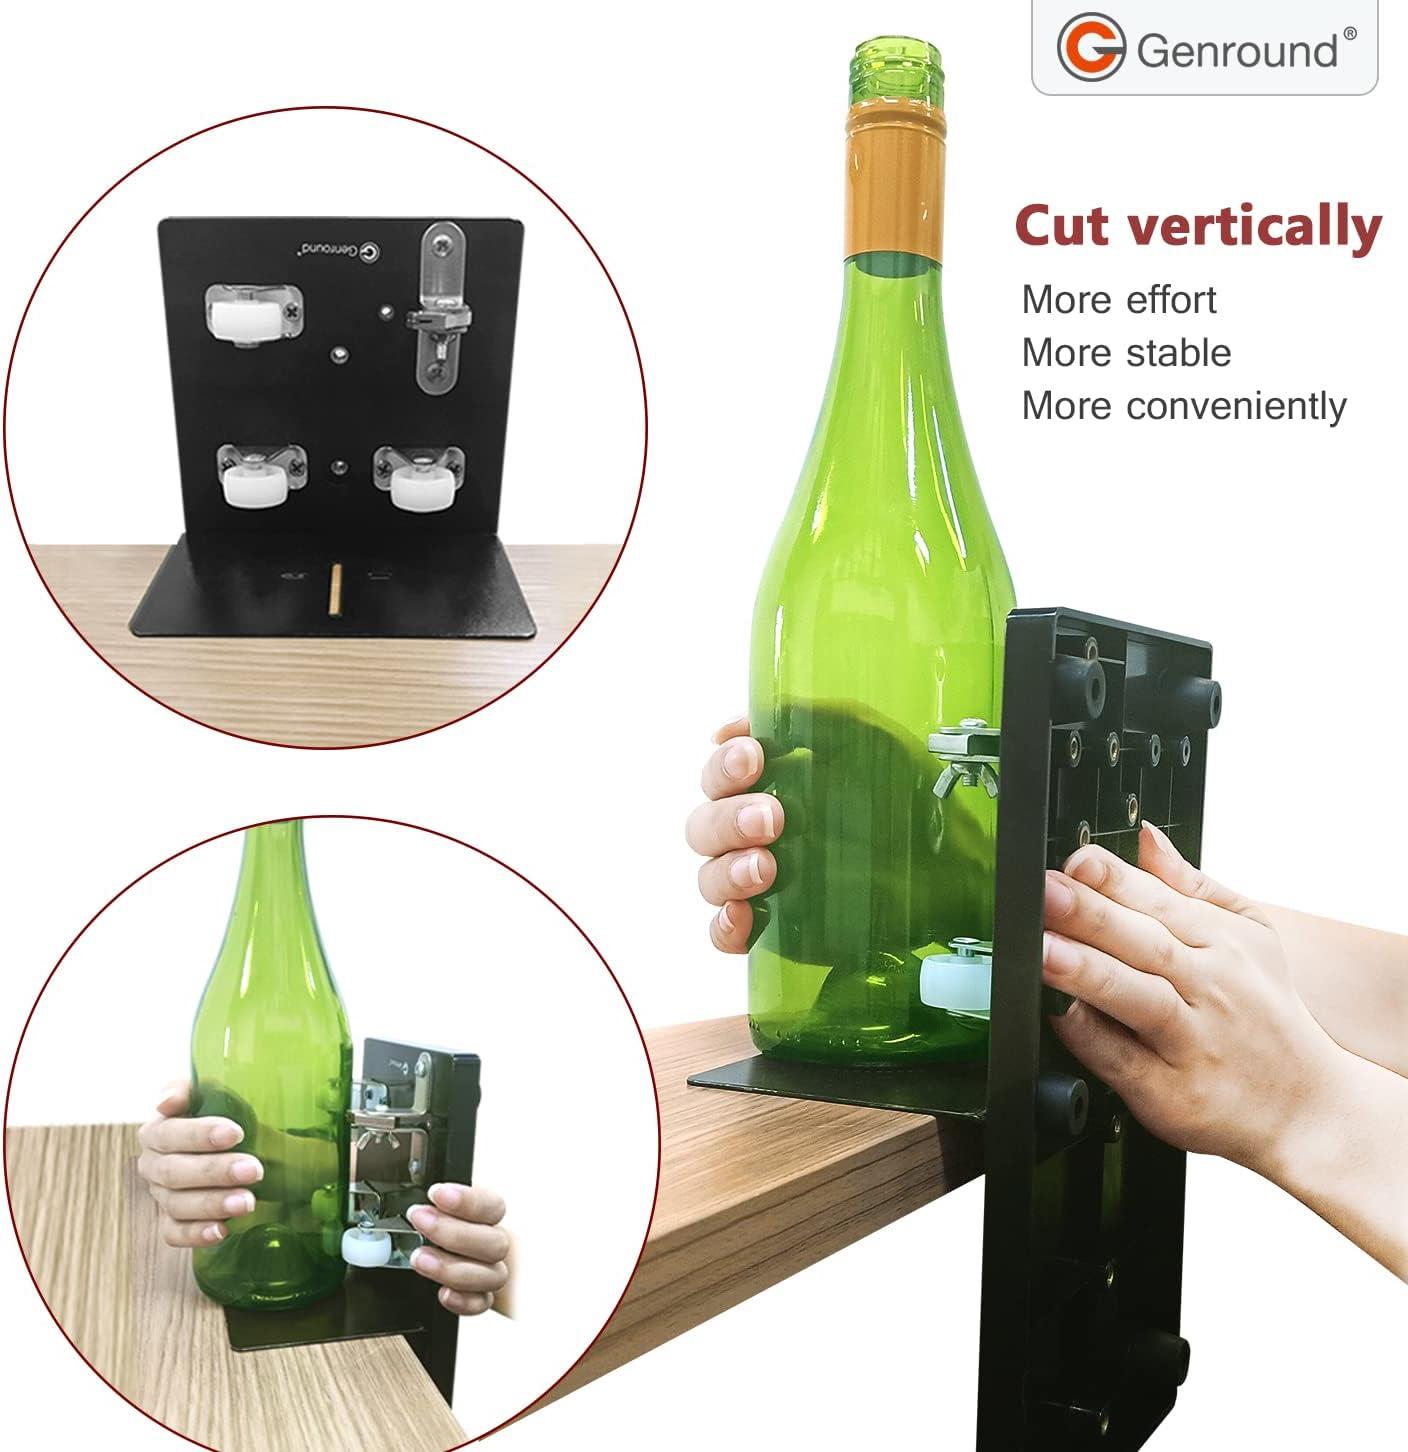 Bottle Cutter & Glass Cutter Kit Round and Square, Upgraded Bottle Cutting